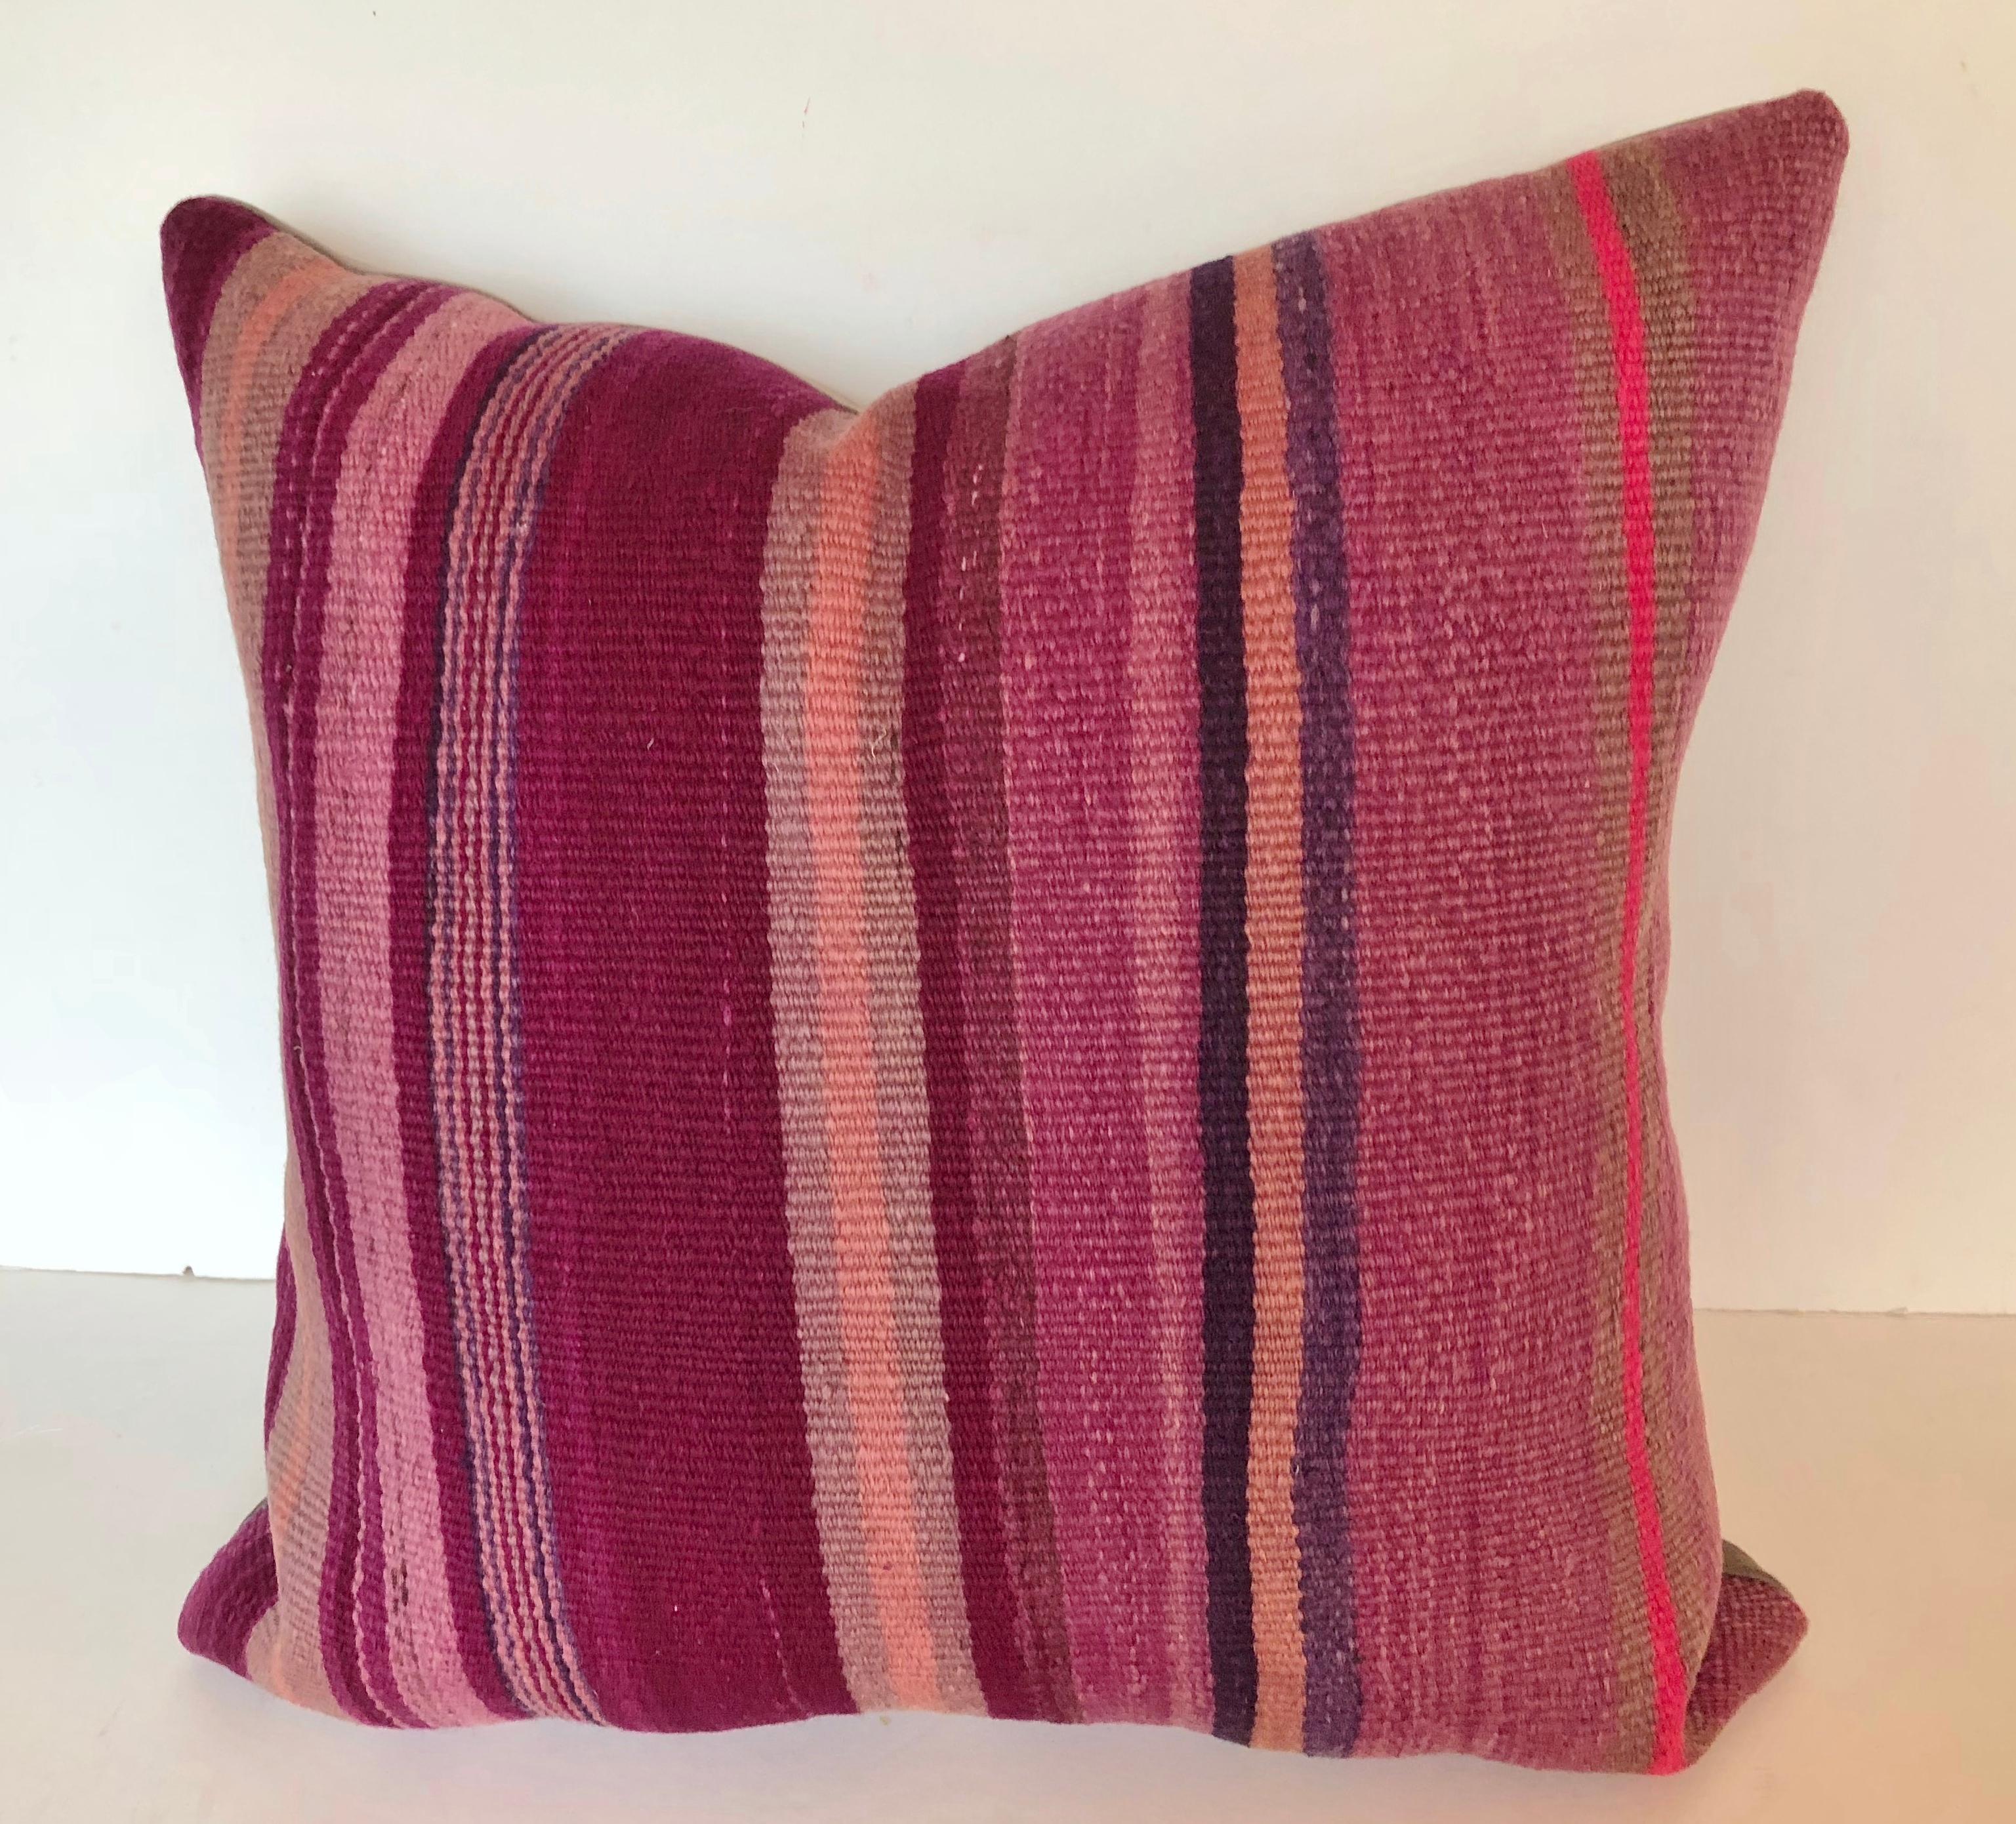 Custom pillow cut from a vintage Moroccan hand loomed wool Berber rug from the Atlas Mountains. Wool is soft and lustrous with vivid stripes in shades of purple. Pillow is filled with an insert of 50/50 down and feathers, backed in a wool blend and